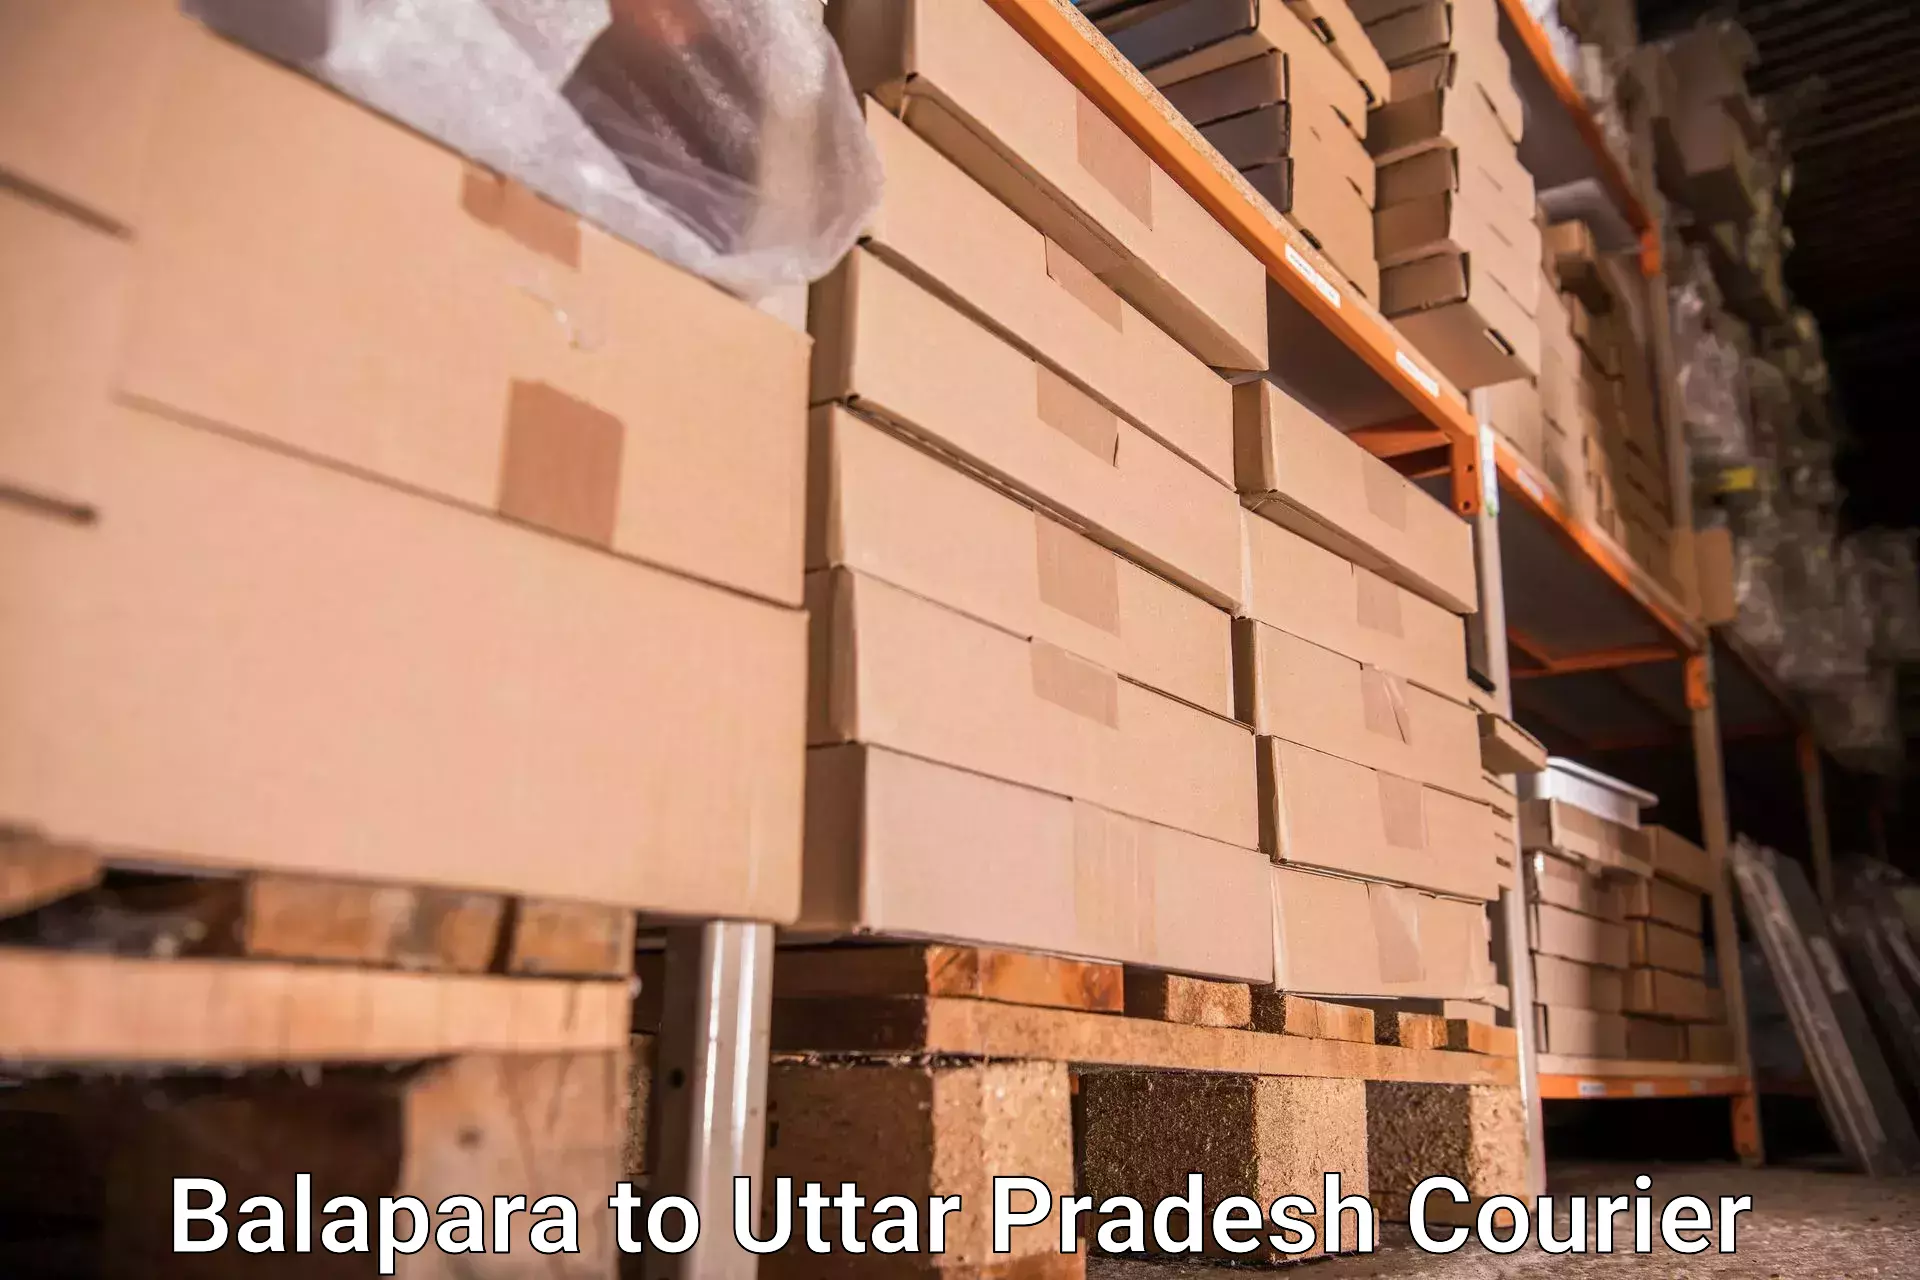 Instant baggage transport quote in Balapara to Shohratgarh